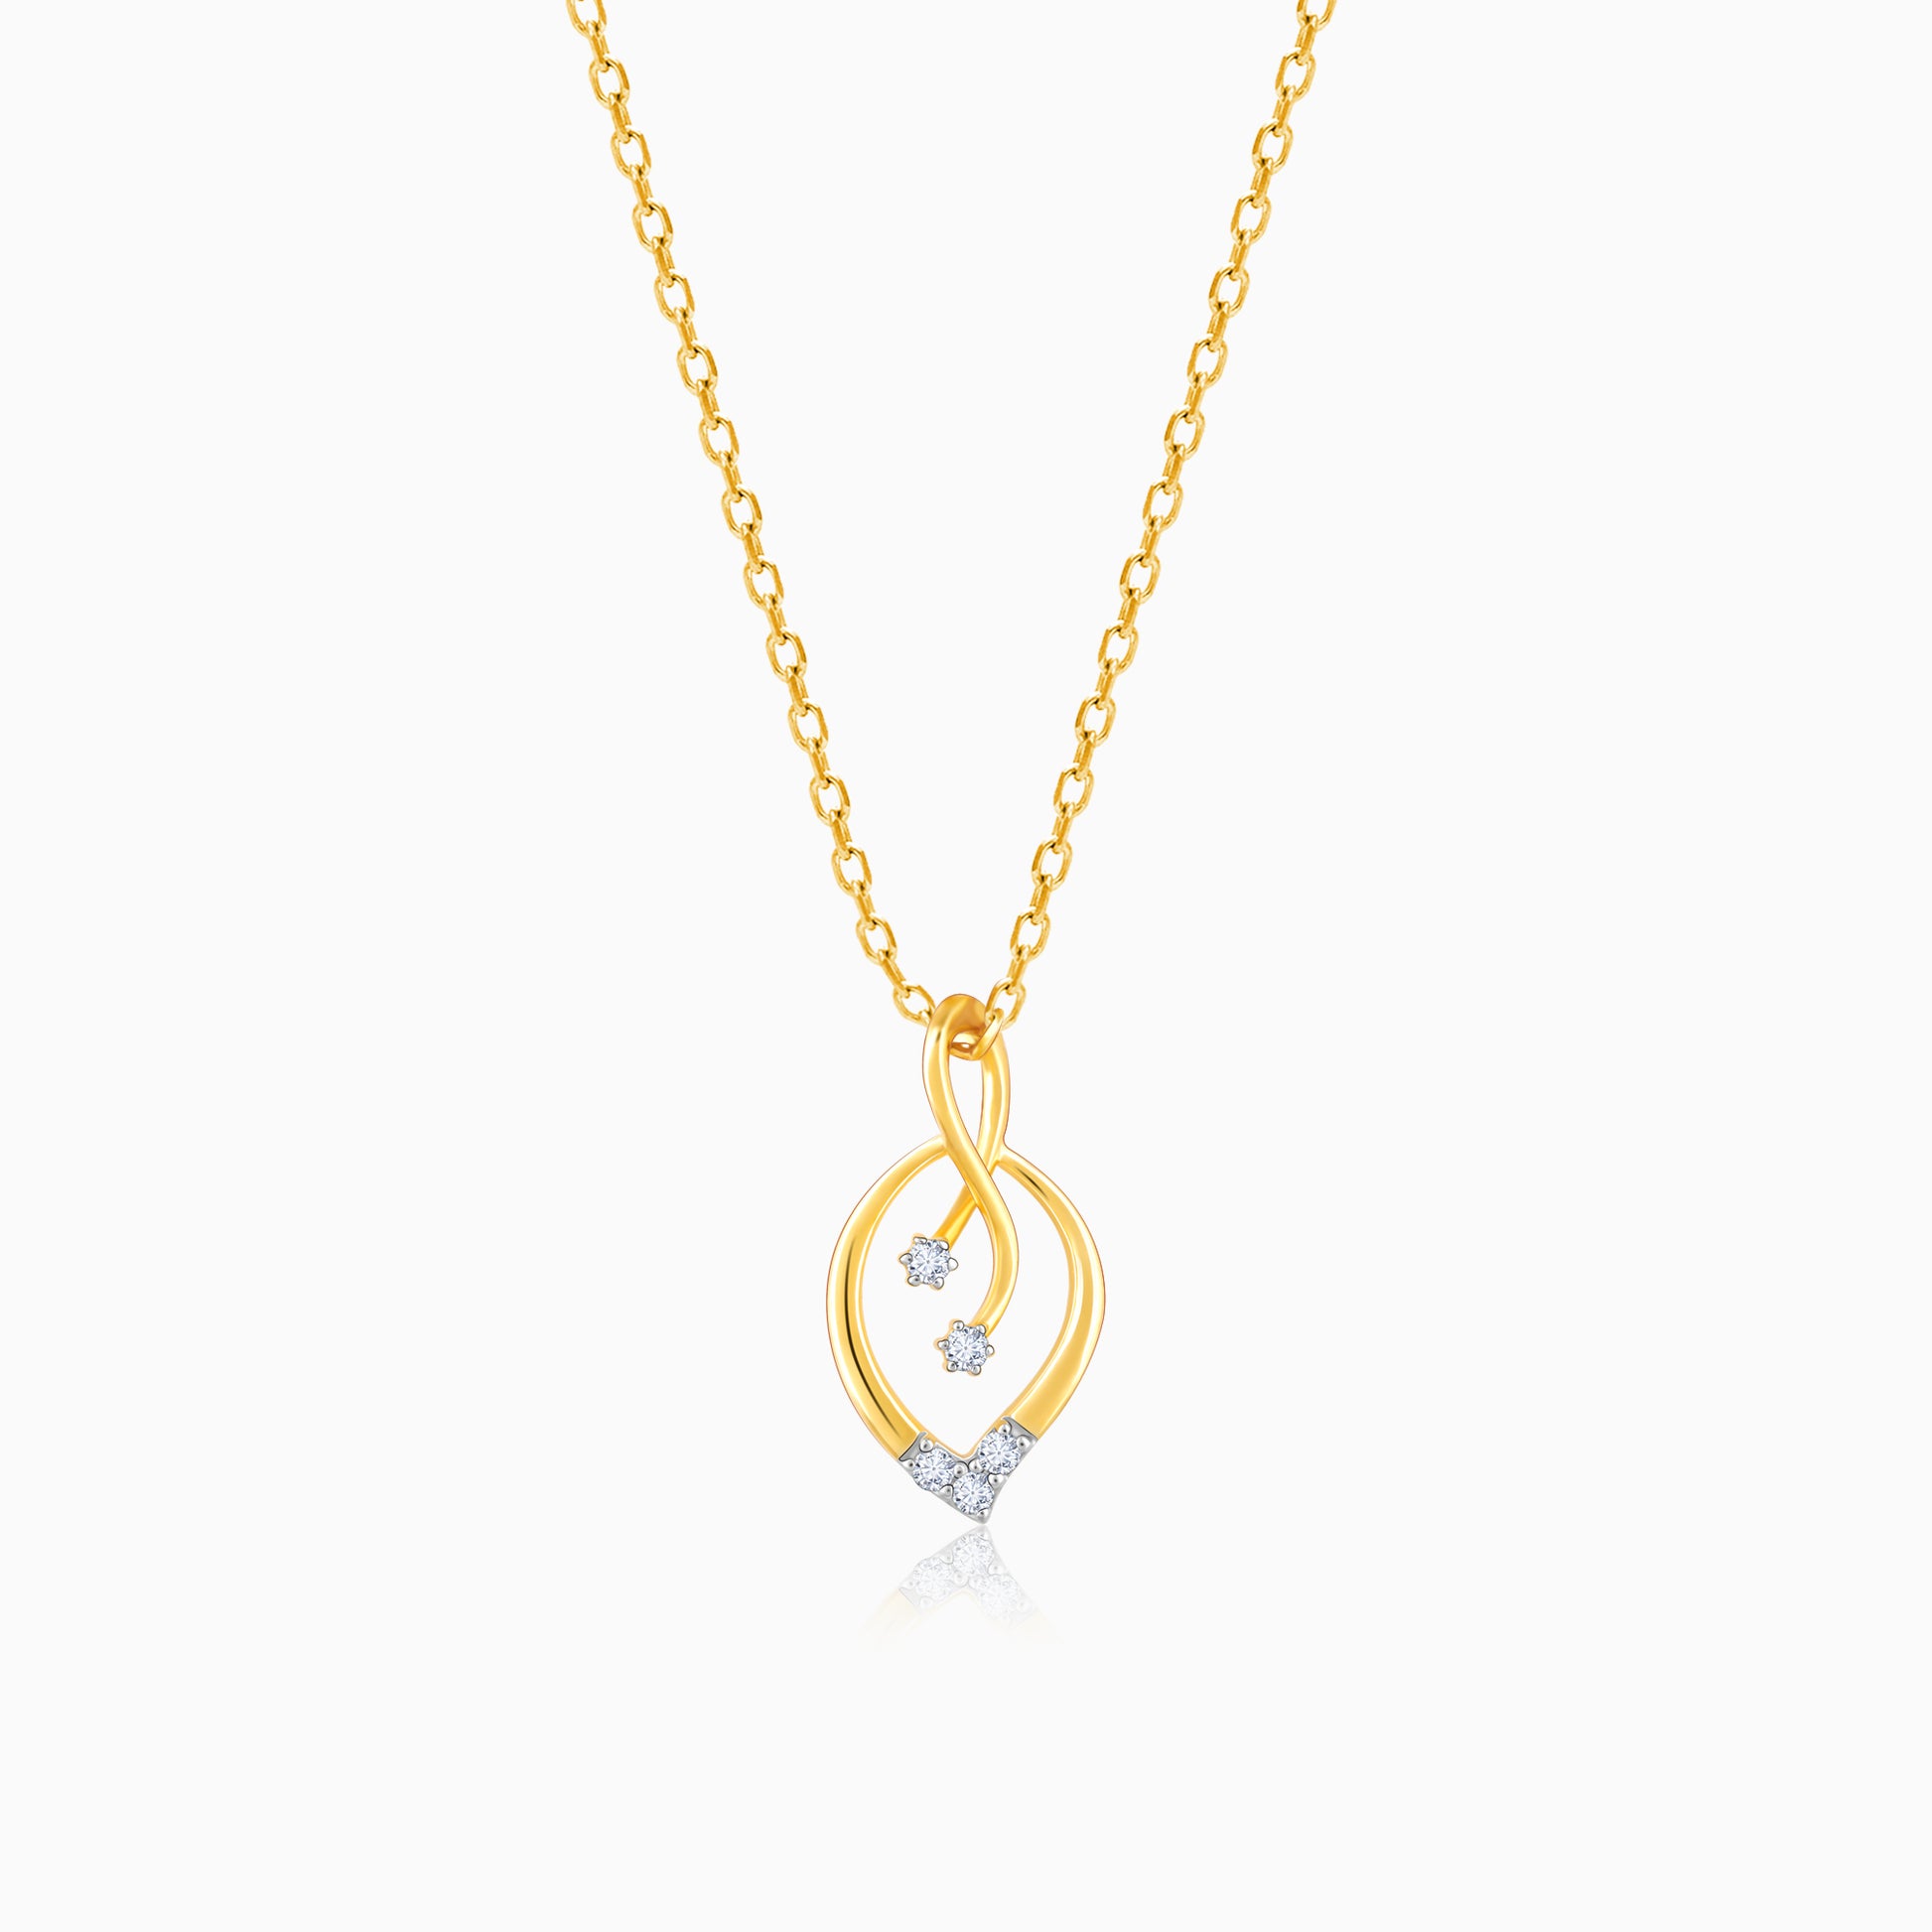 Find Your Rhythm Crystal and Chain Necklace Set 14kt Gold